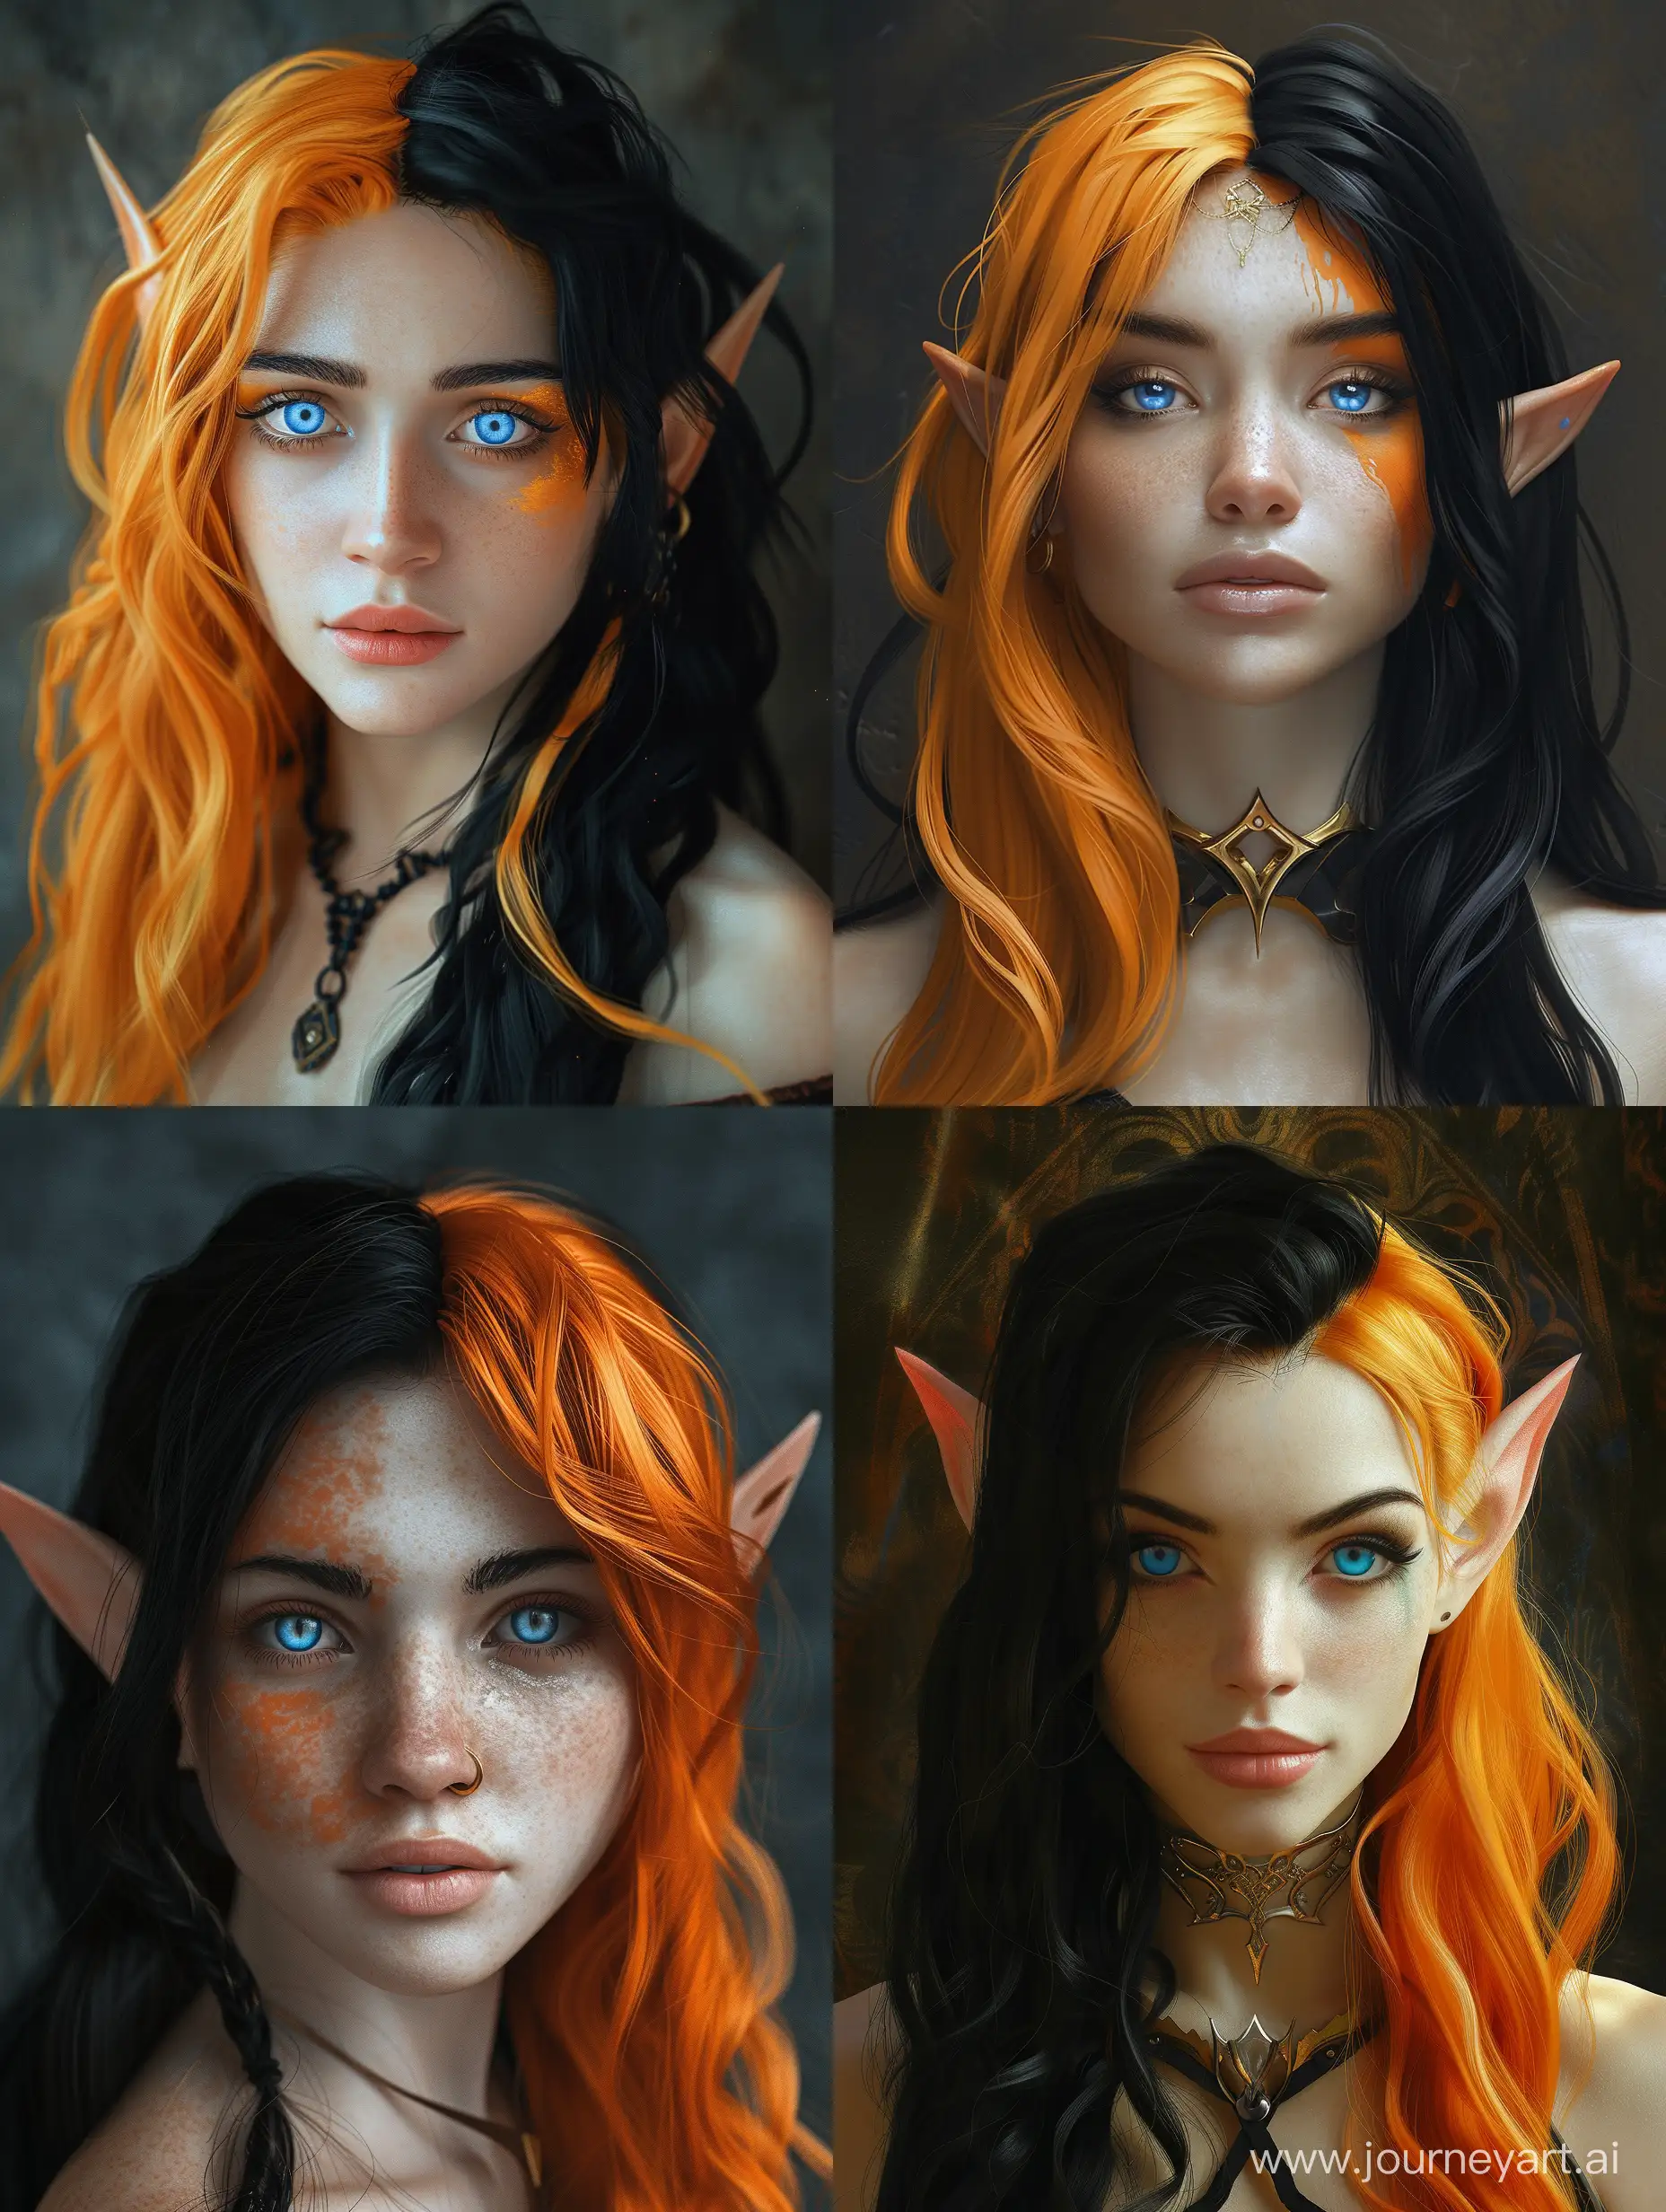 Realistic-Portrait-of-a-DualToned-Elf-with-Tan-and-Orange-Hair